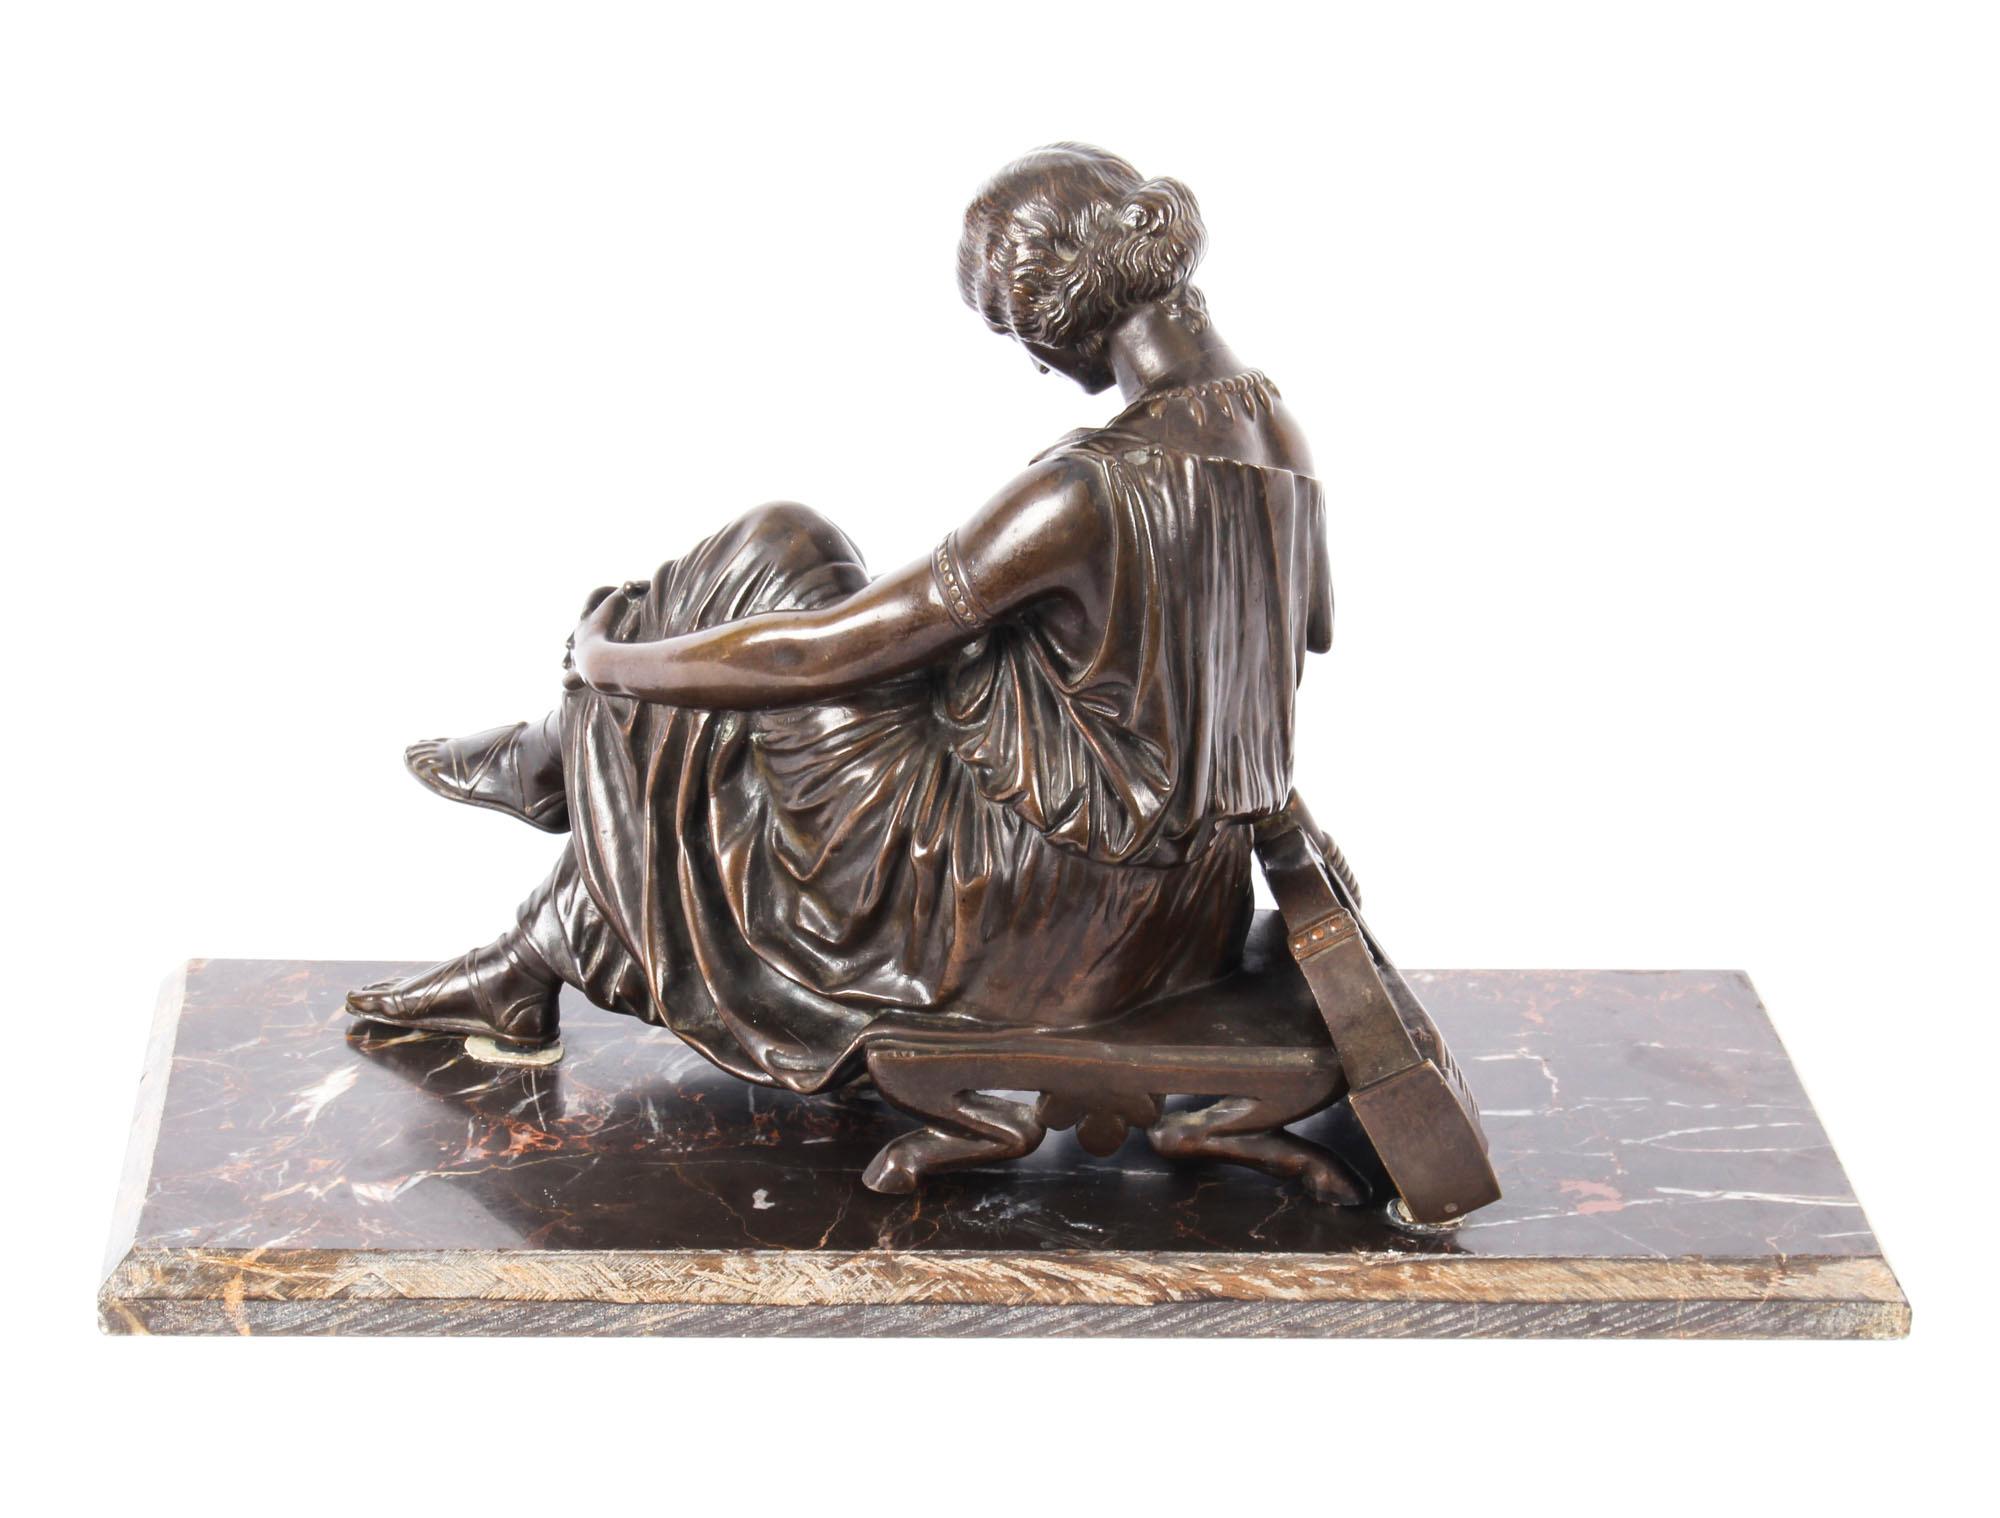 Mid-19th Century French Bronze Sculpture of Seated Poet Sappho after J. Pradier, 19th Century